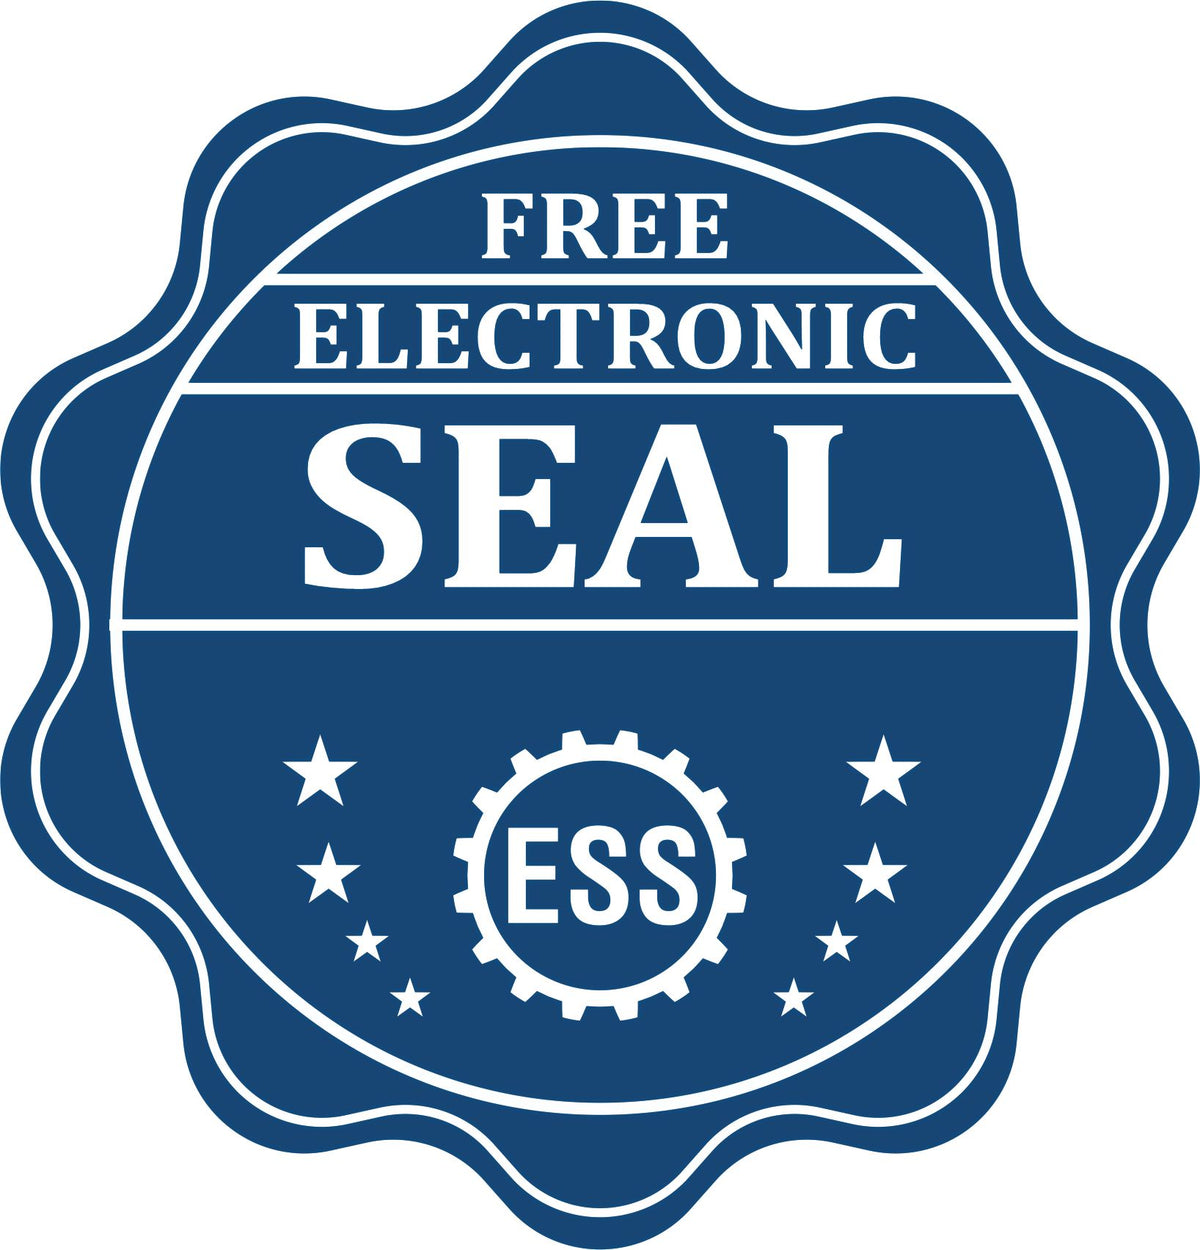 A badge showing a free electronic seal for the Premium MaxLight Pre-Inked Hawaii Geology Stamp with stars and the ESS gear on the emblem.